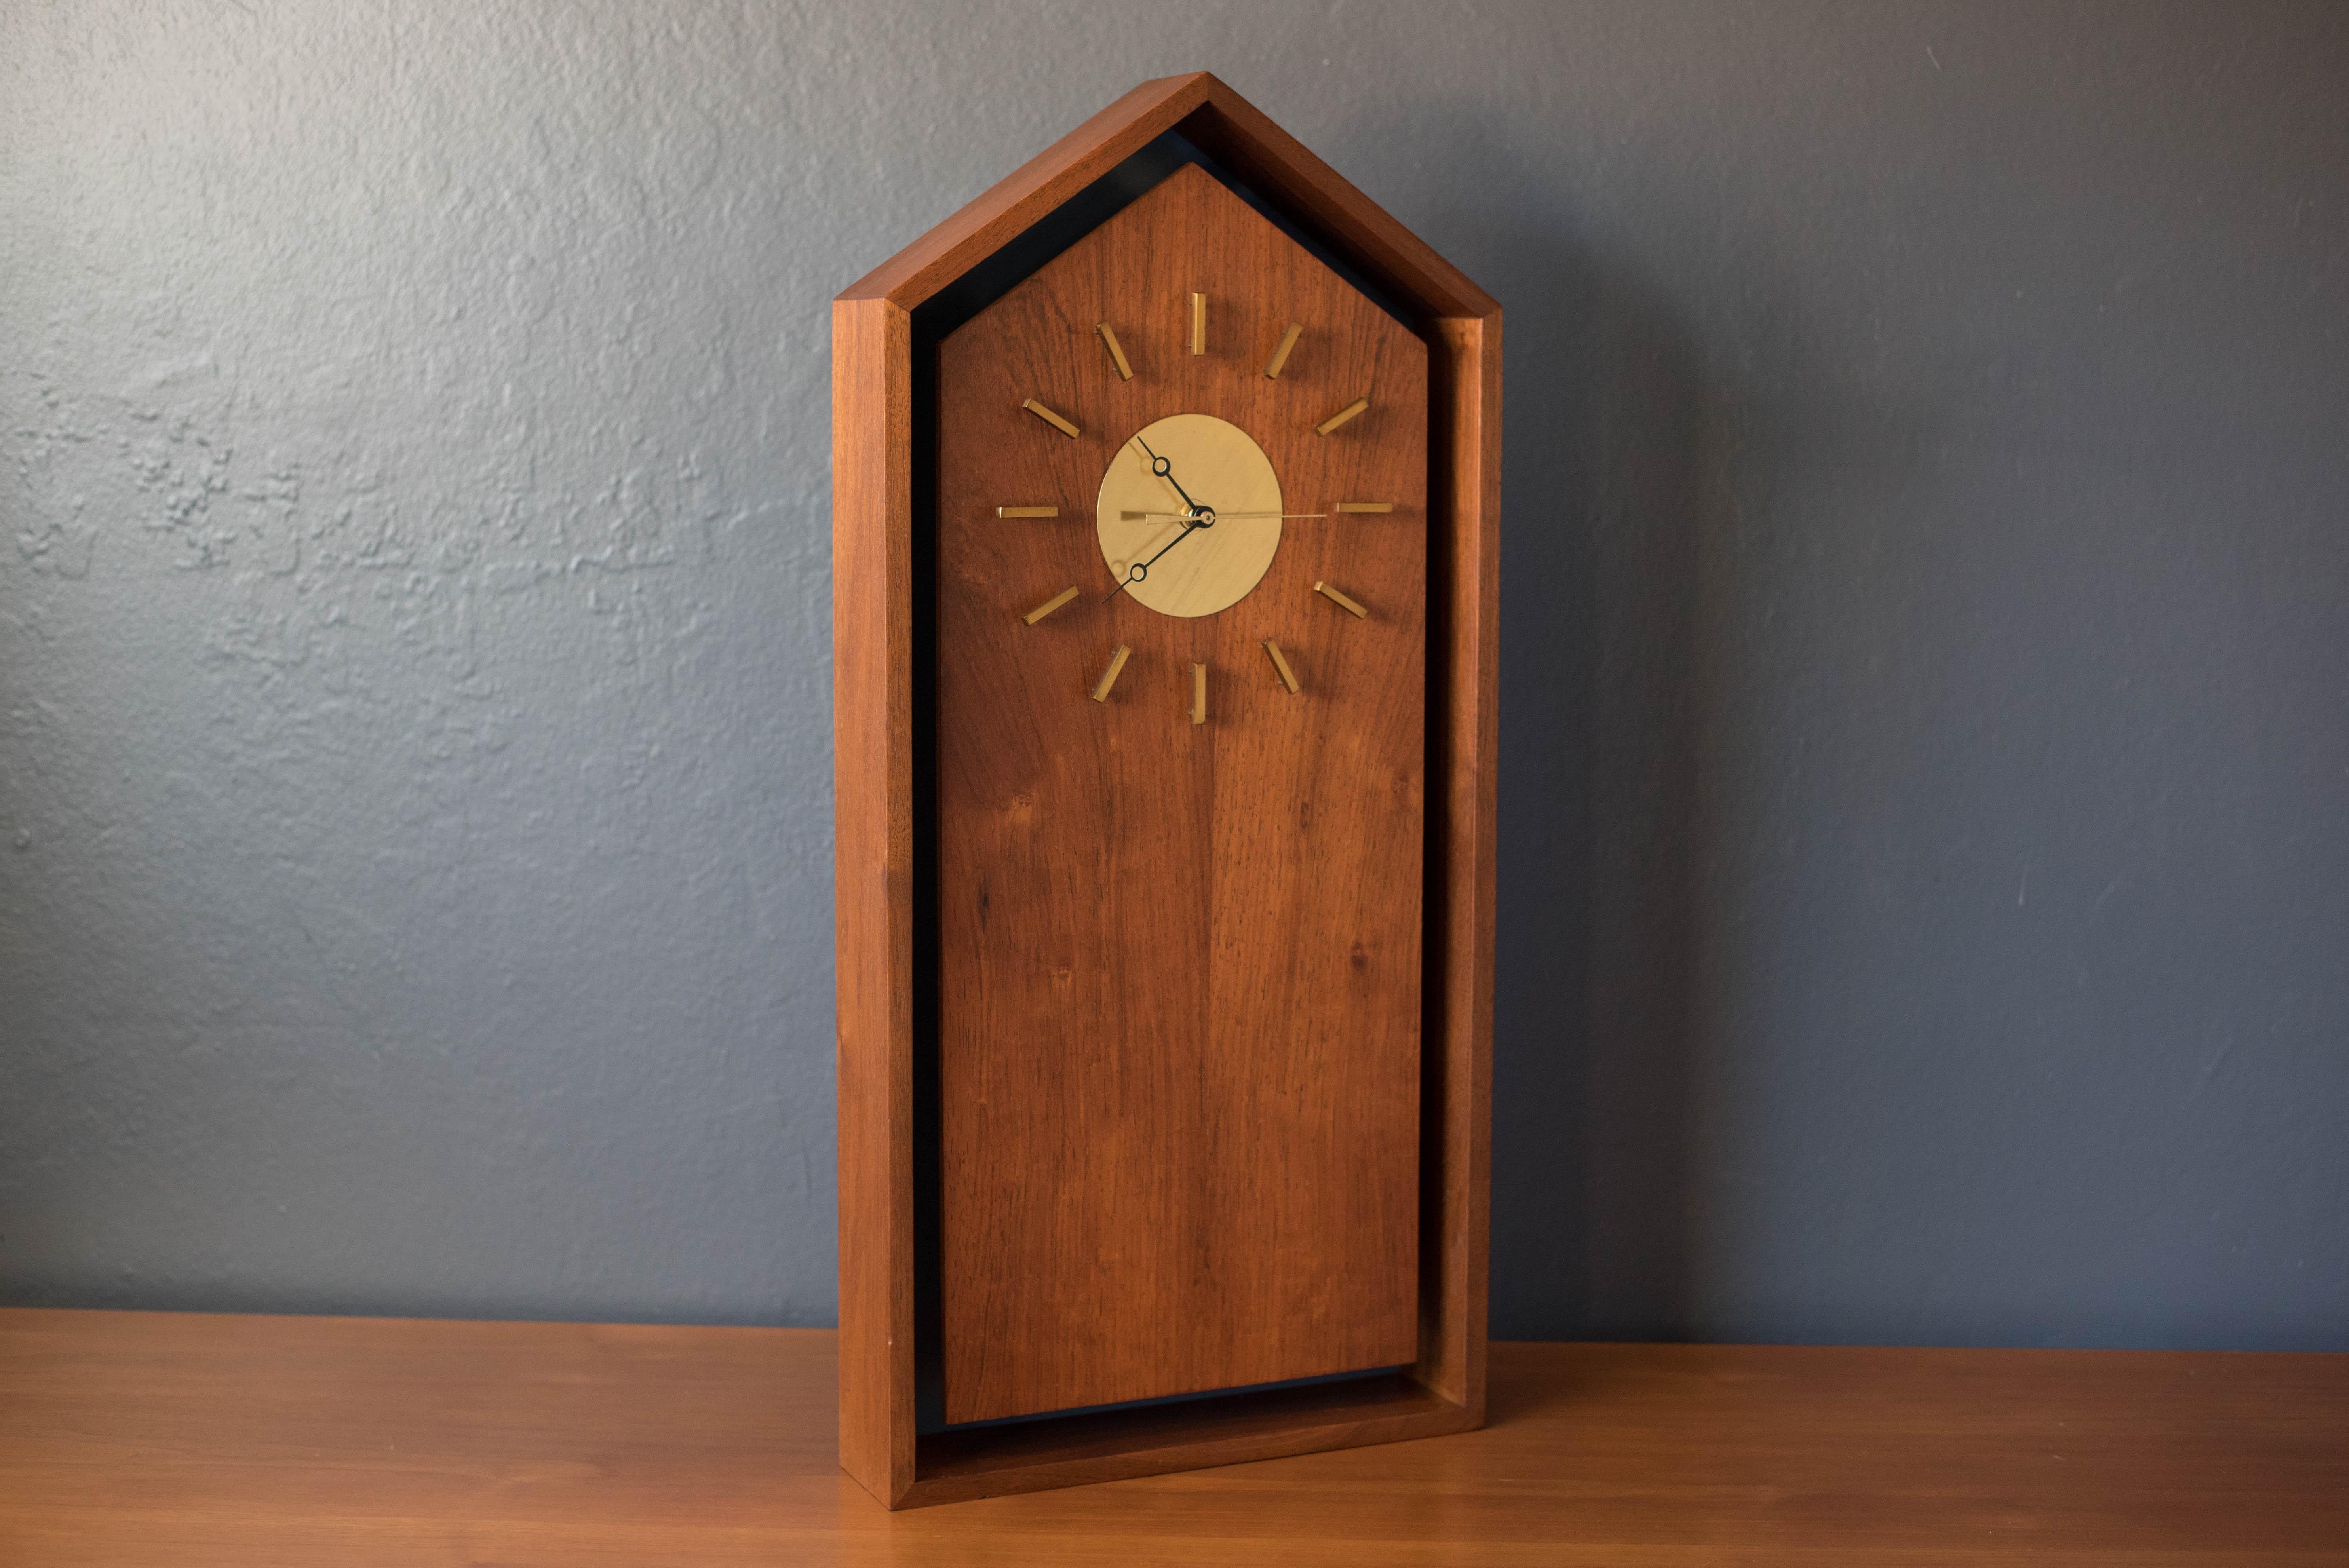 Vintage wall hanging case clock designed by Arthur Umanoff for Howard Miller model no. 585 in walnut, circa 1960s. This piece is accented with an inset matte blue backdrop and brass plated face. Equipped with a brand new continuous sweep movement